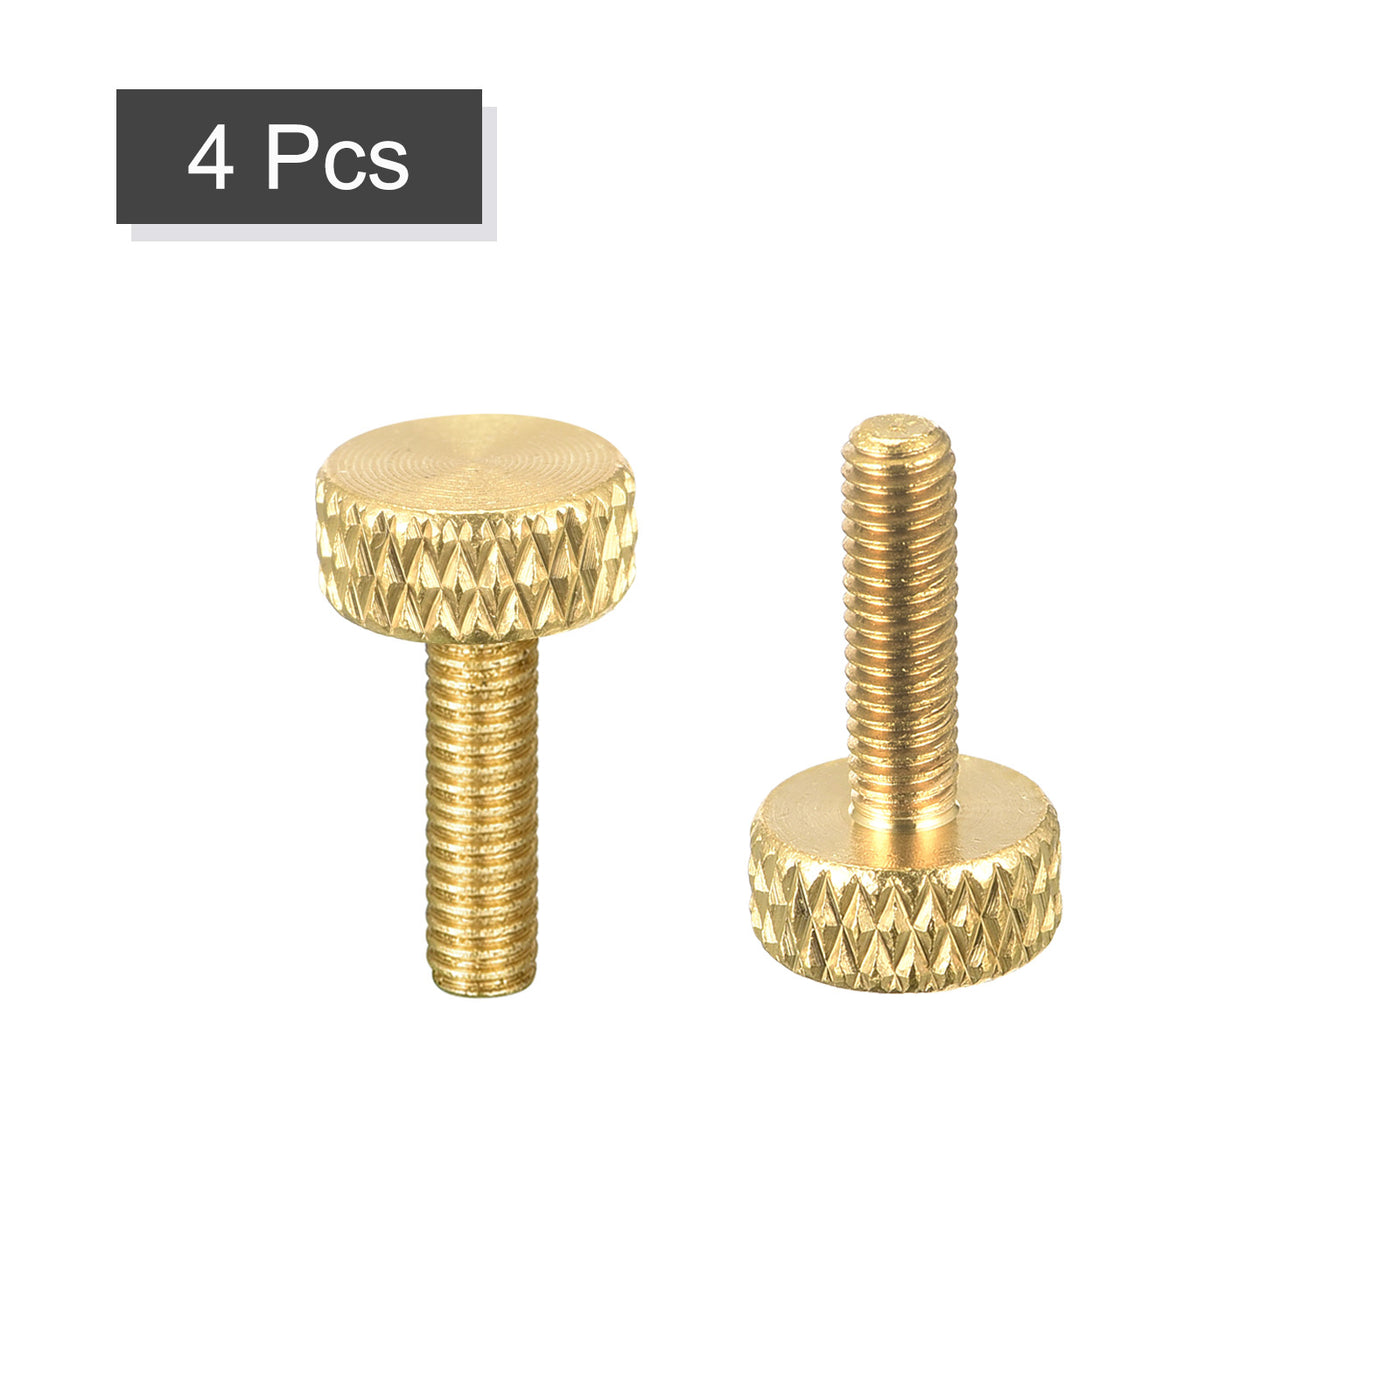 uxcell Uxcell 4Pcs Brass Knurled Thumb Screws, M3x10mm  13.5mm Length Flat Grip Bolt Knobs Fasteners for Electronic, Mechanical